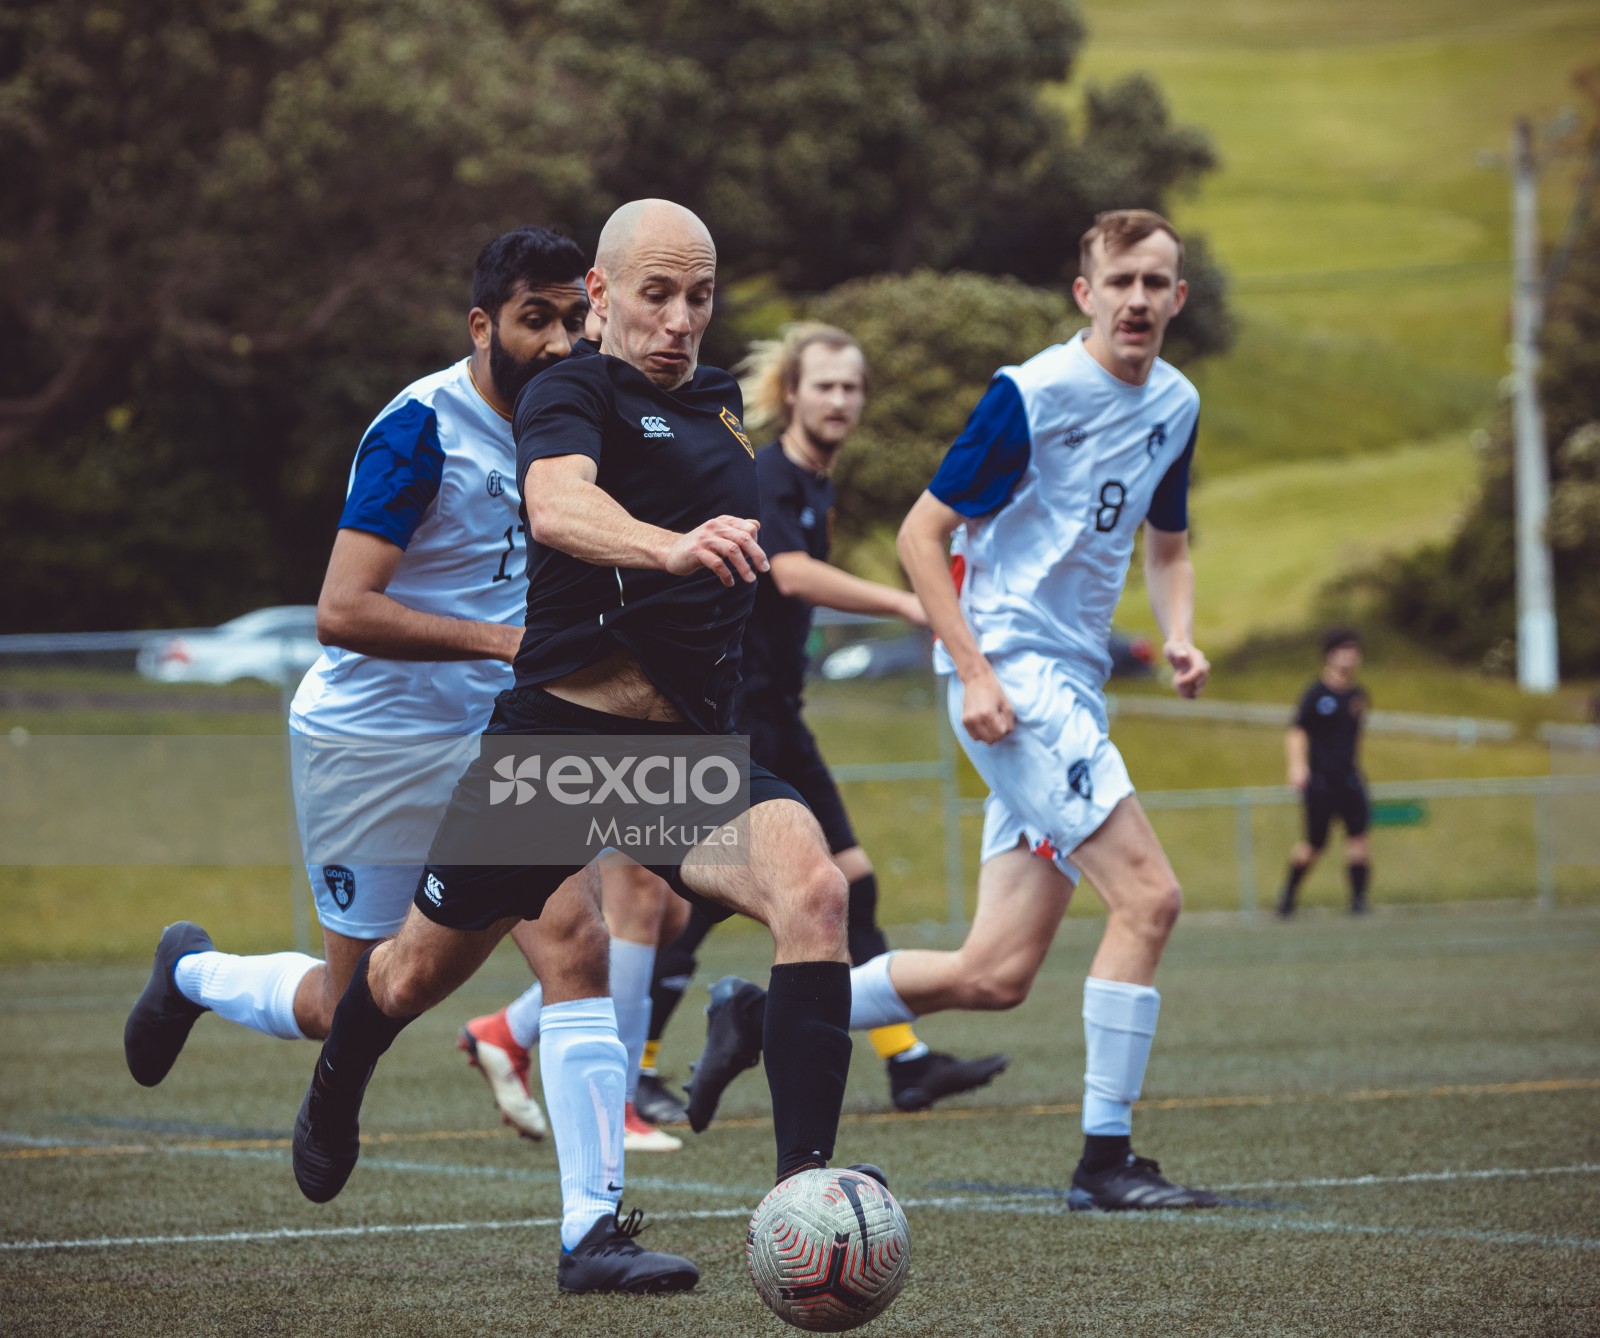 Bald player in black shirt running to score a goal - Sports Zone sunday league